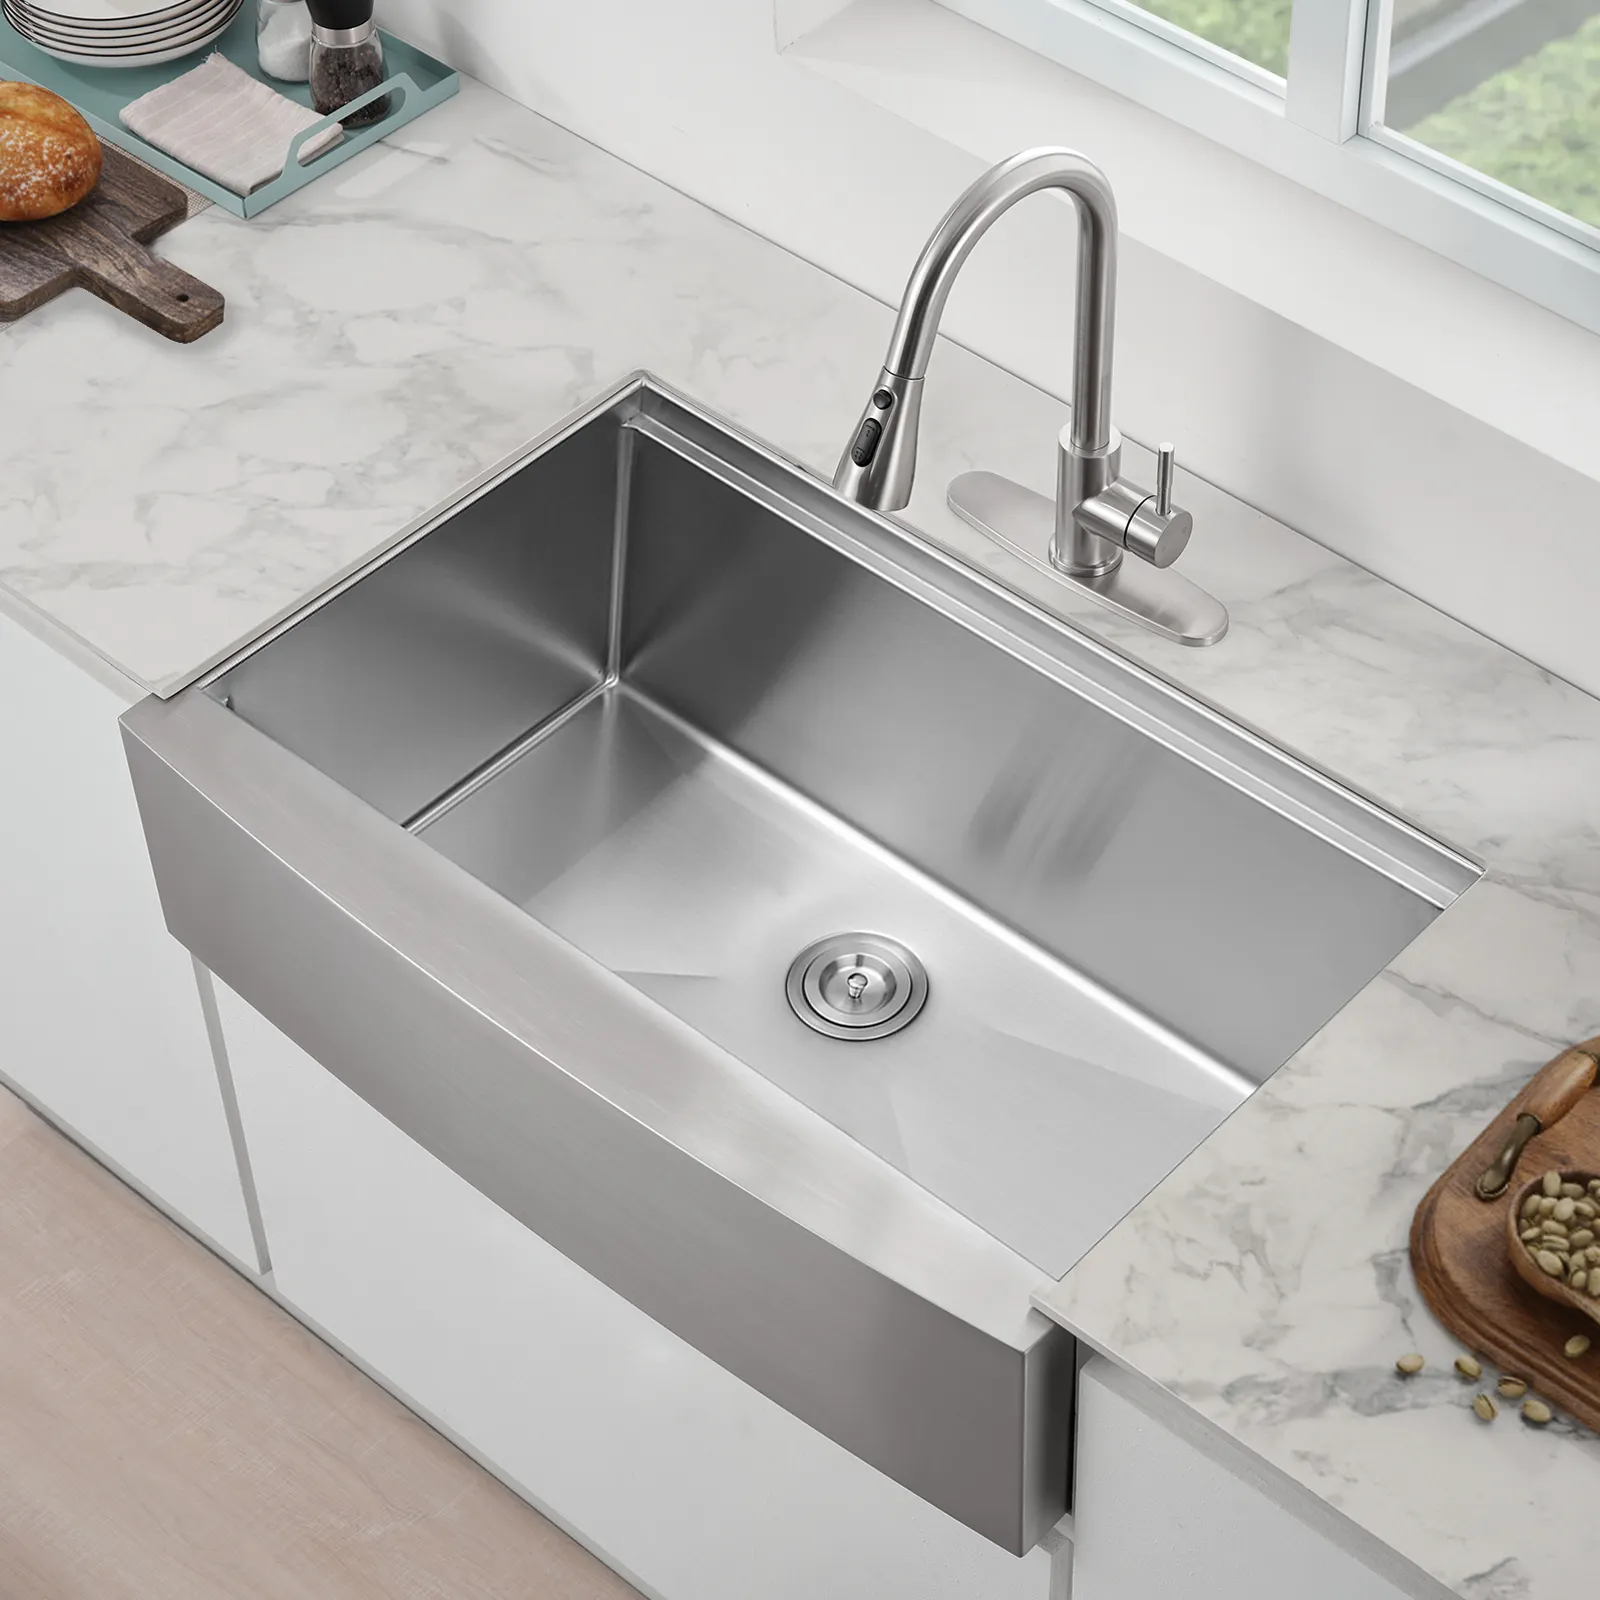 USA warehouse delivery luxury 33 x 22 Inch 18 Gauge Stainless Steel Farmhouse Apron Kitchen Sink